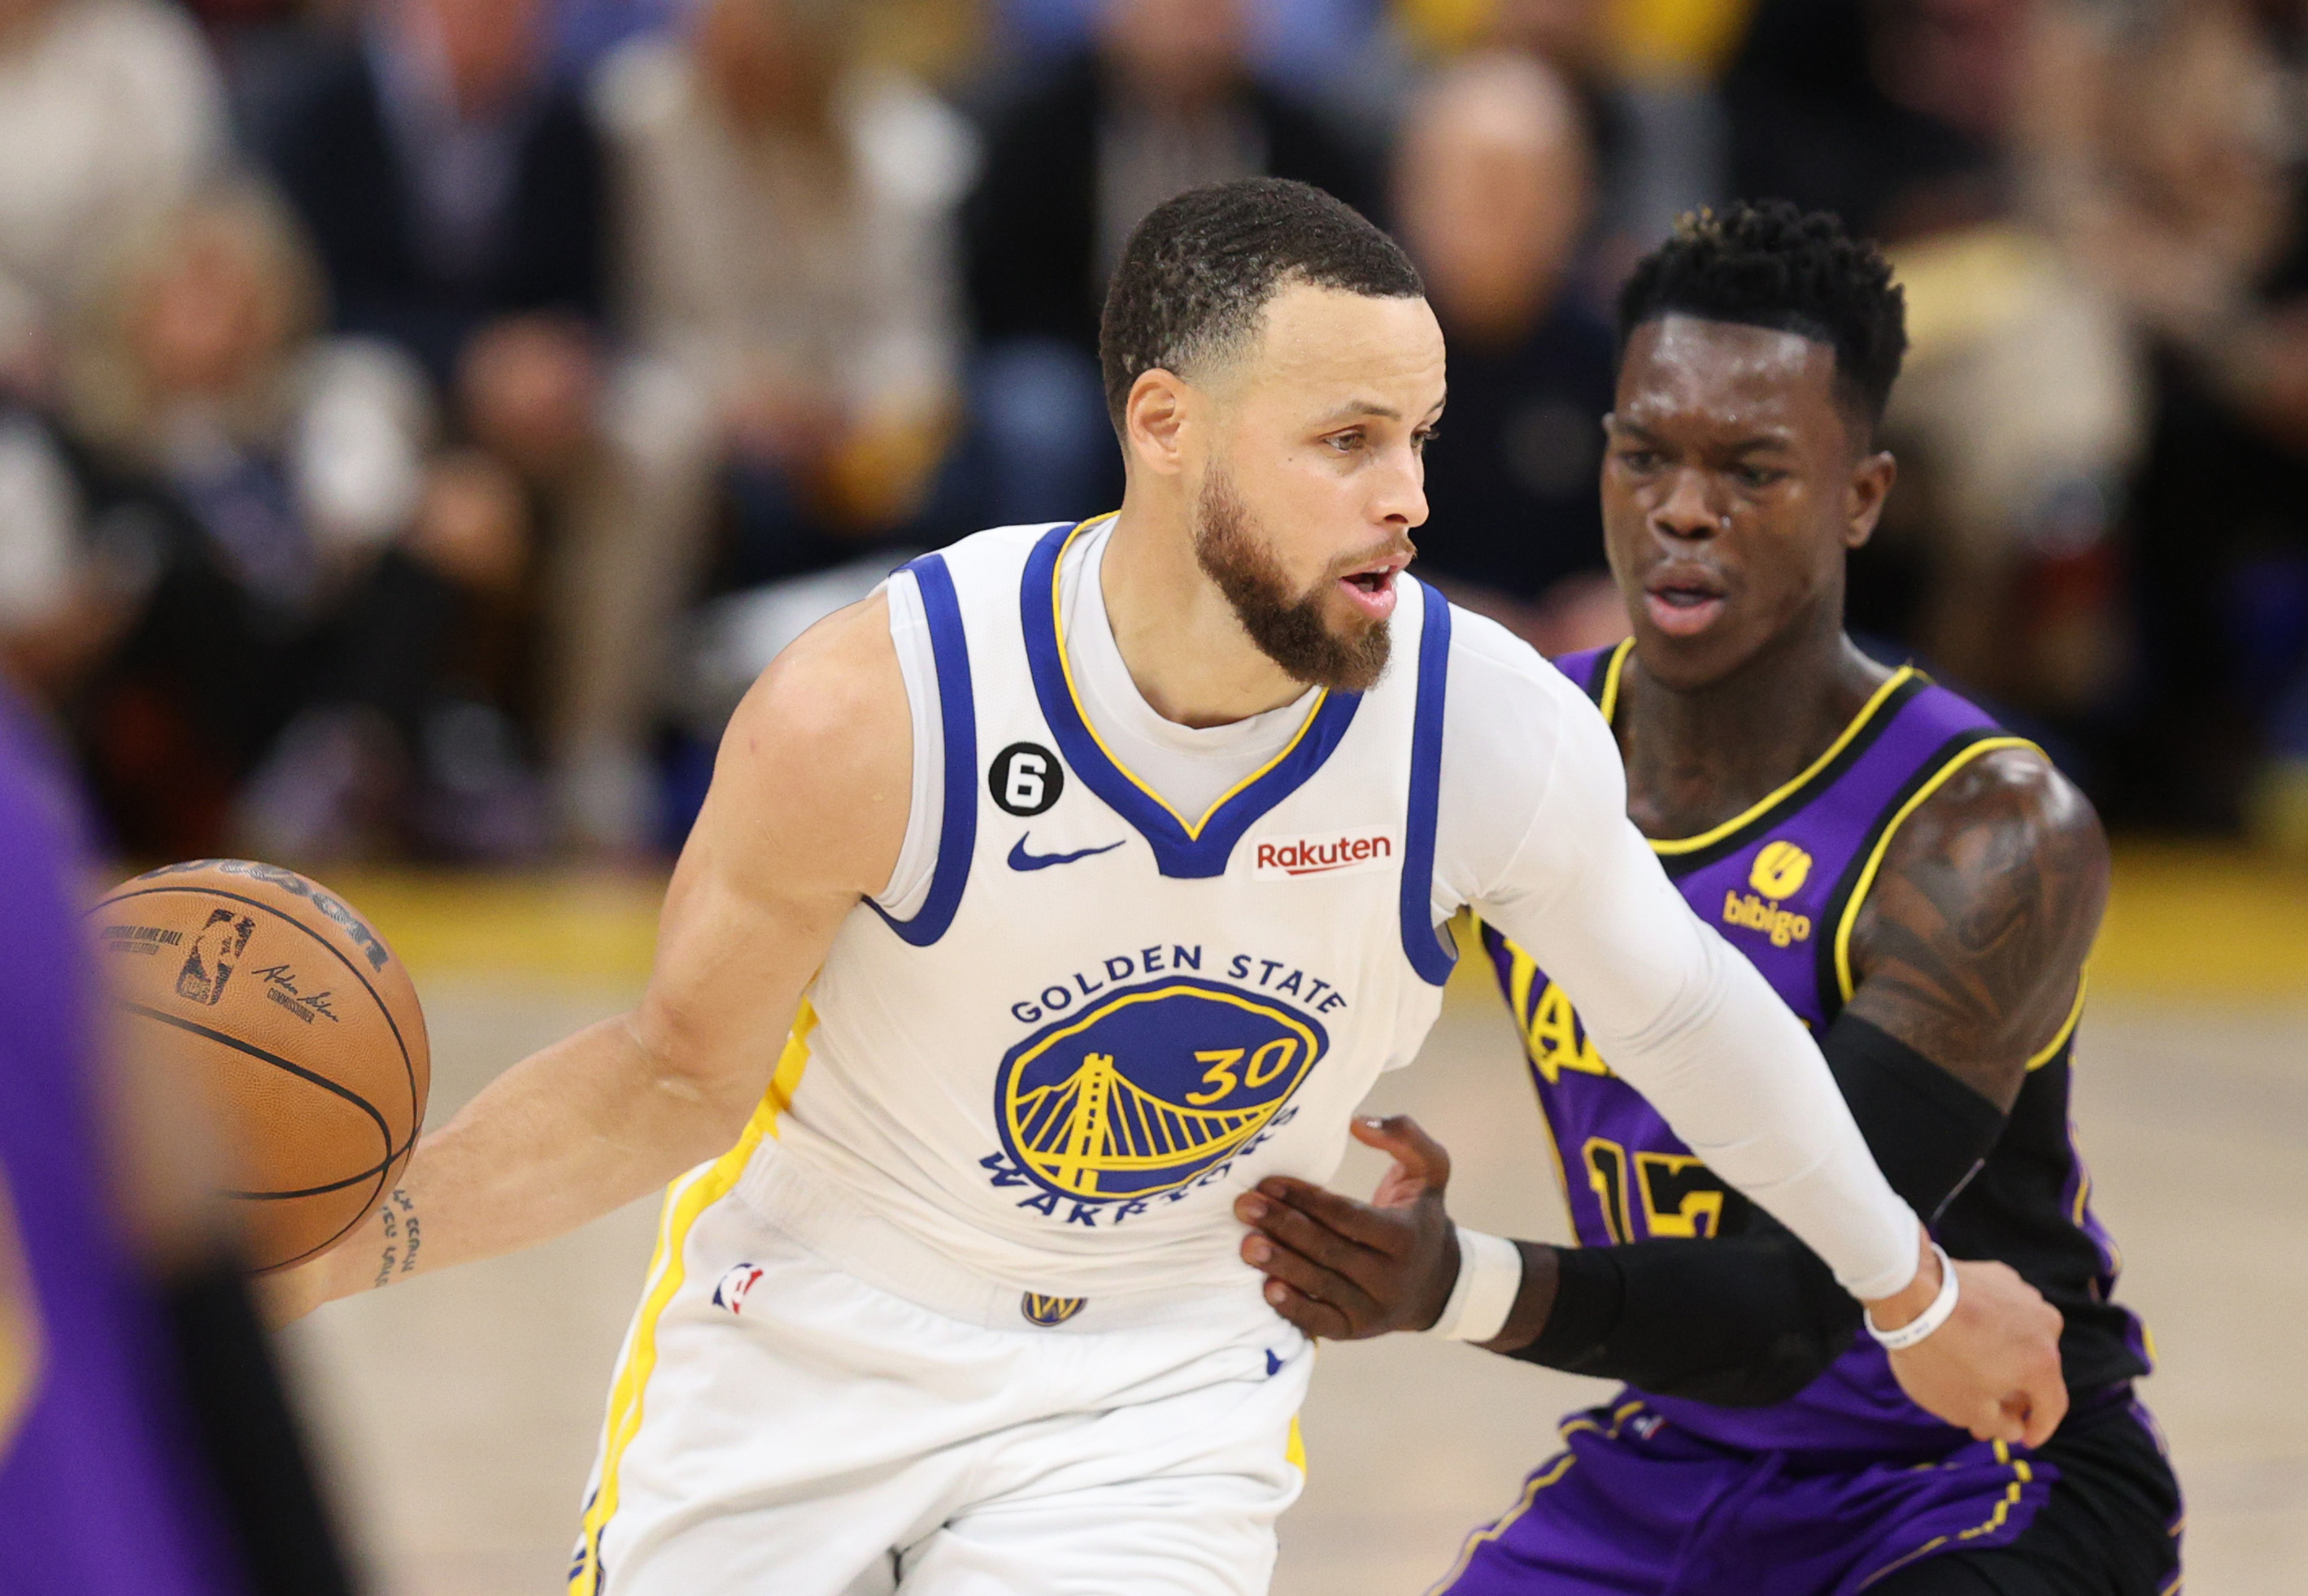 Warriors vs. Lakers odds, prediction: Target Steph Curry, Dennis Schröder  in the player prop market